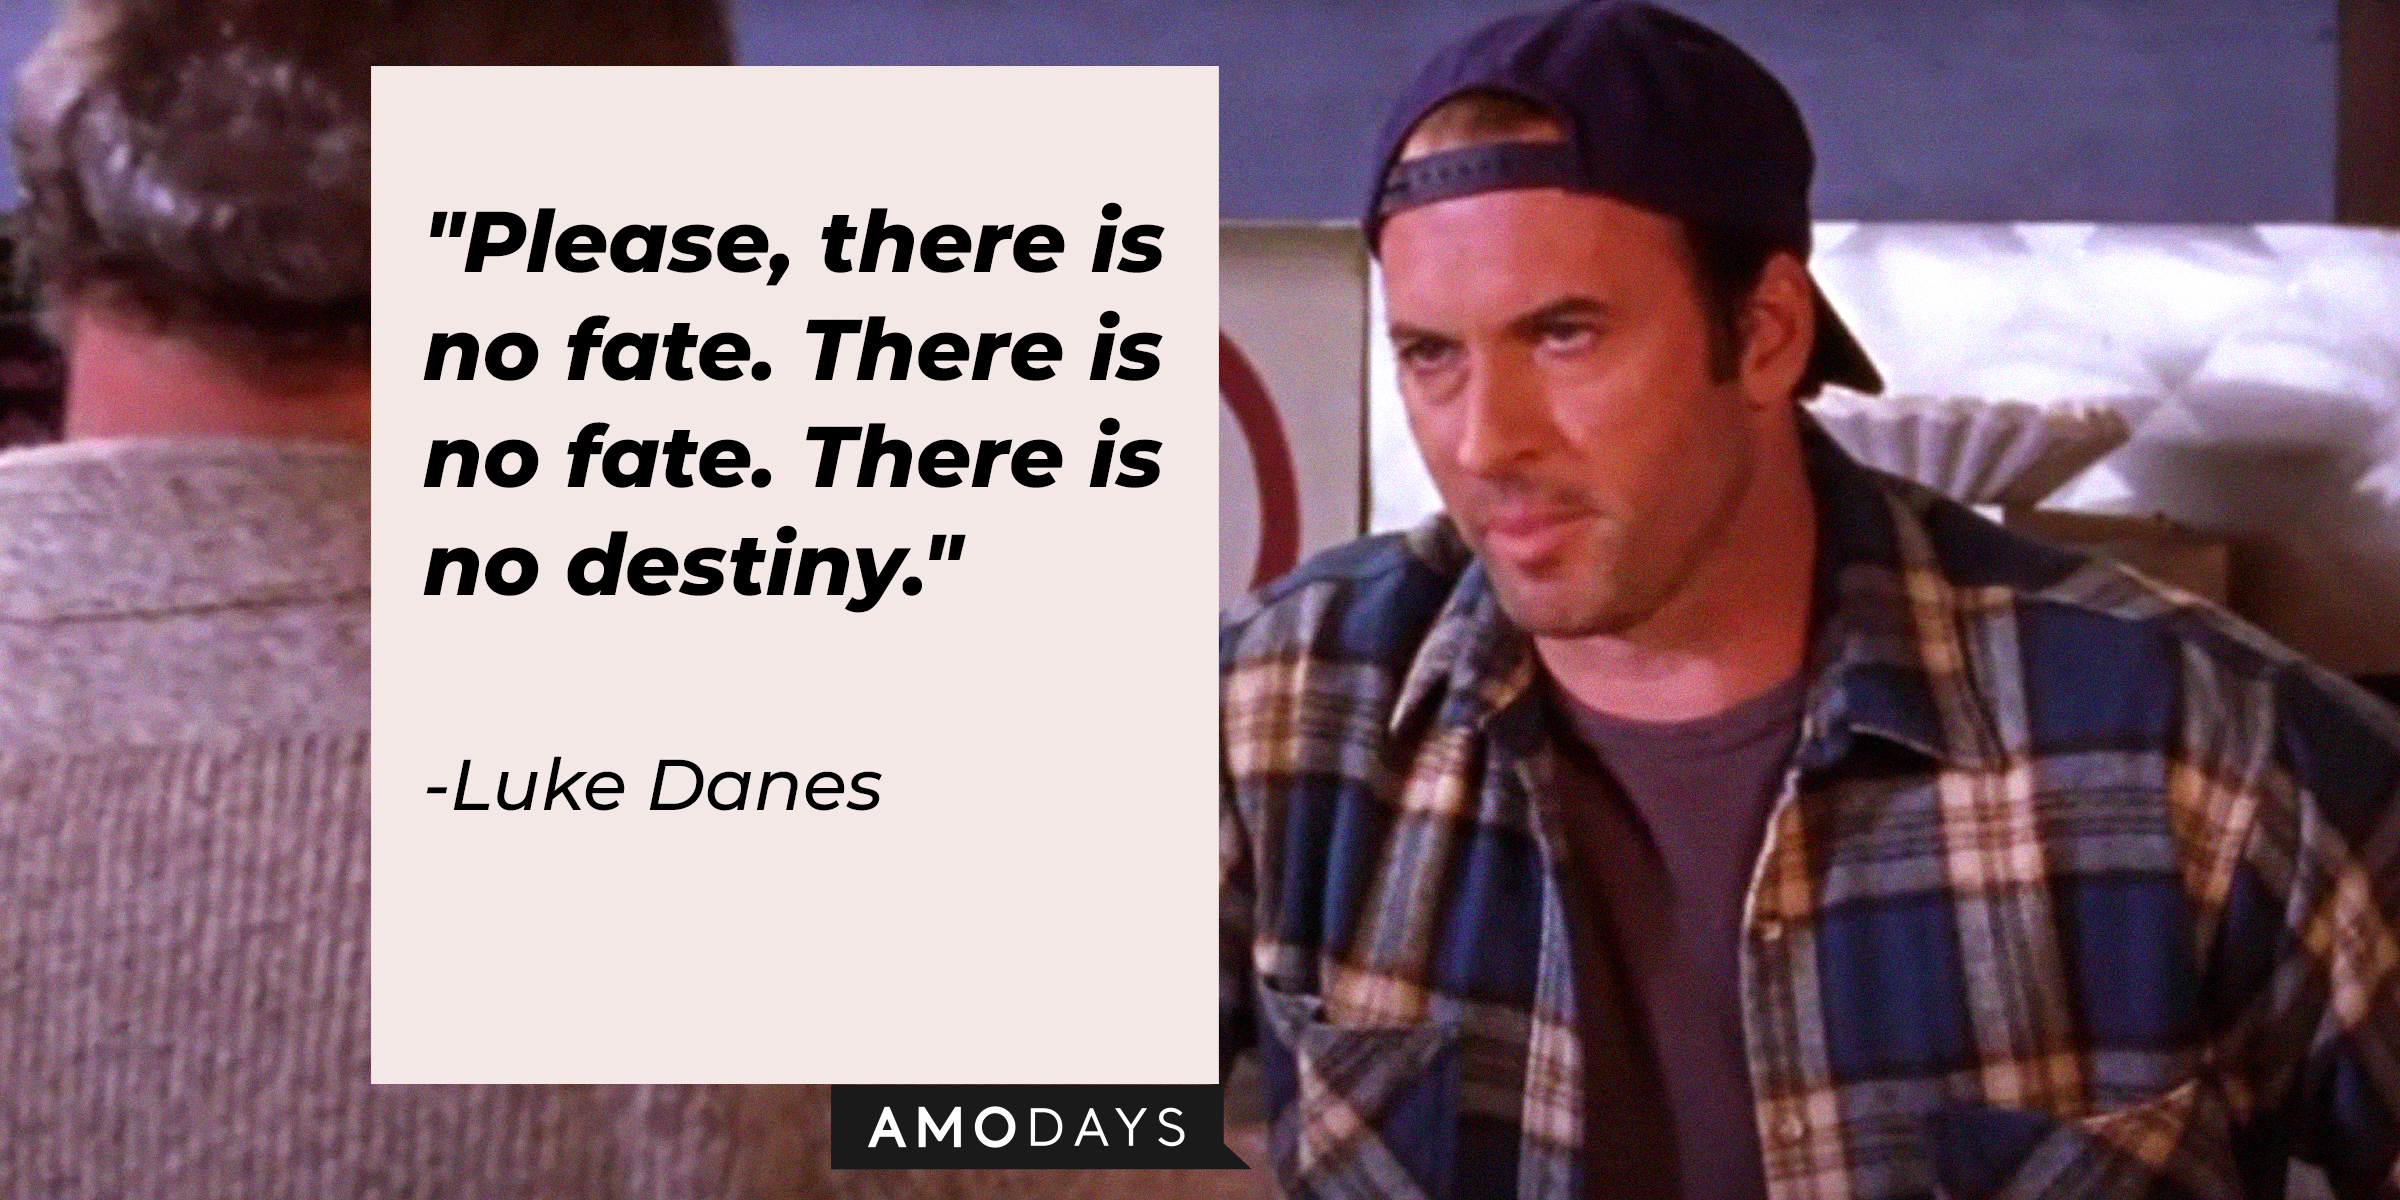 Luke Danes, with his quote: “Please, there is no fate. There is no fate. There is no destiny.” |Source: facebook.com/GilmoreGirls